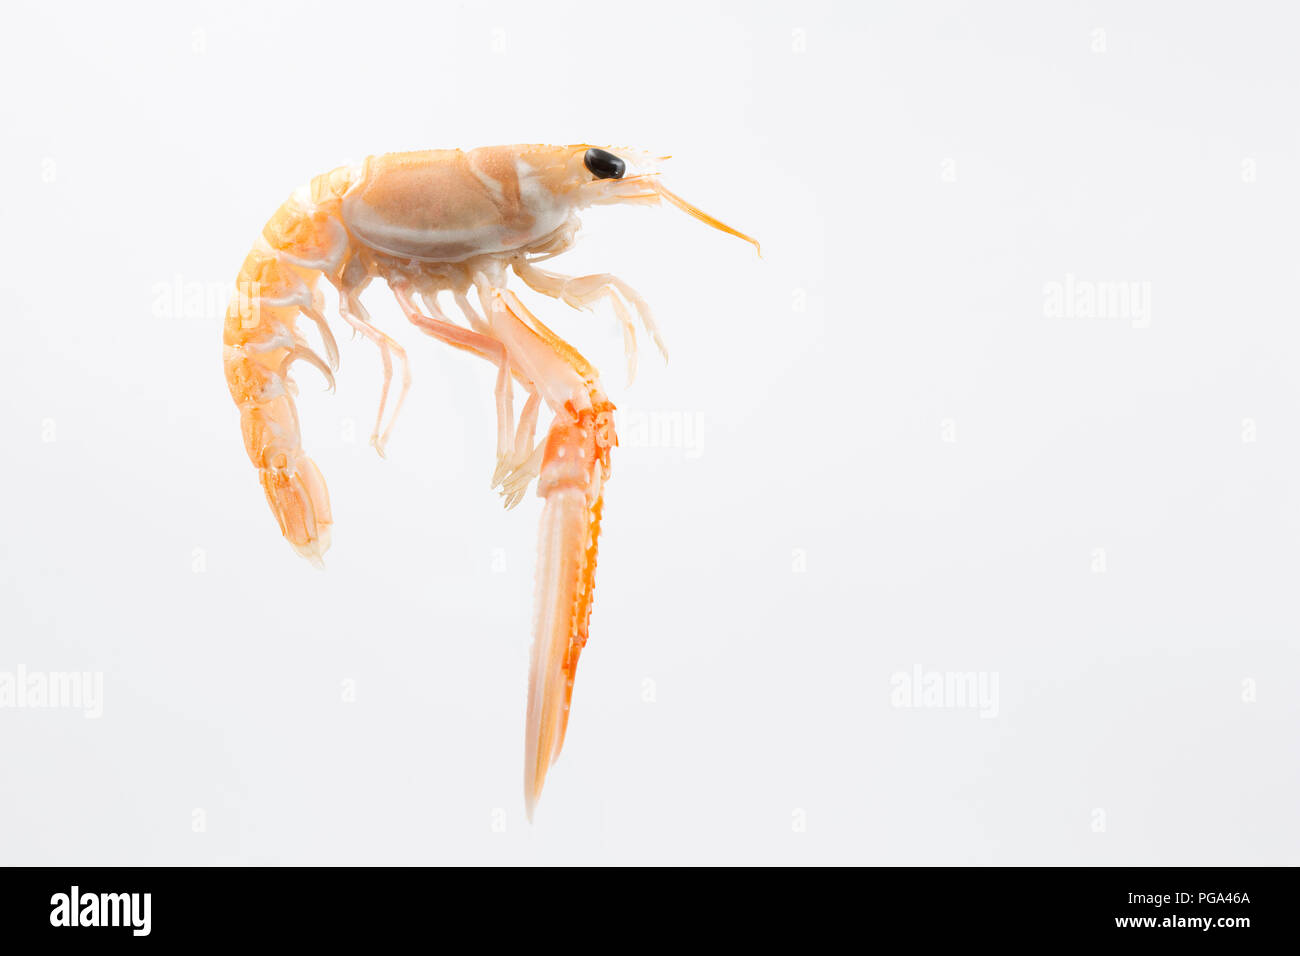 A single raw, uncooked Scottish langoustine, Nephrops norvegicus, bought from a supermarket and photographed in a studio on a white background. The la Stock Photo